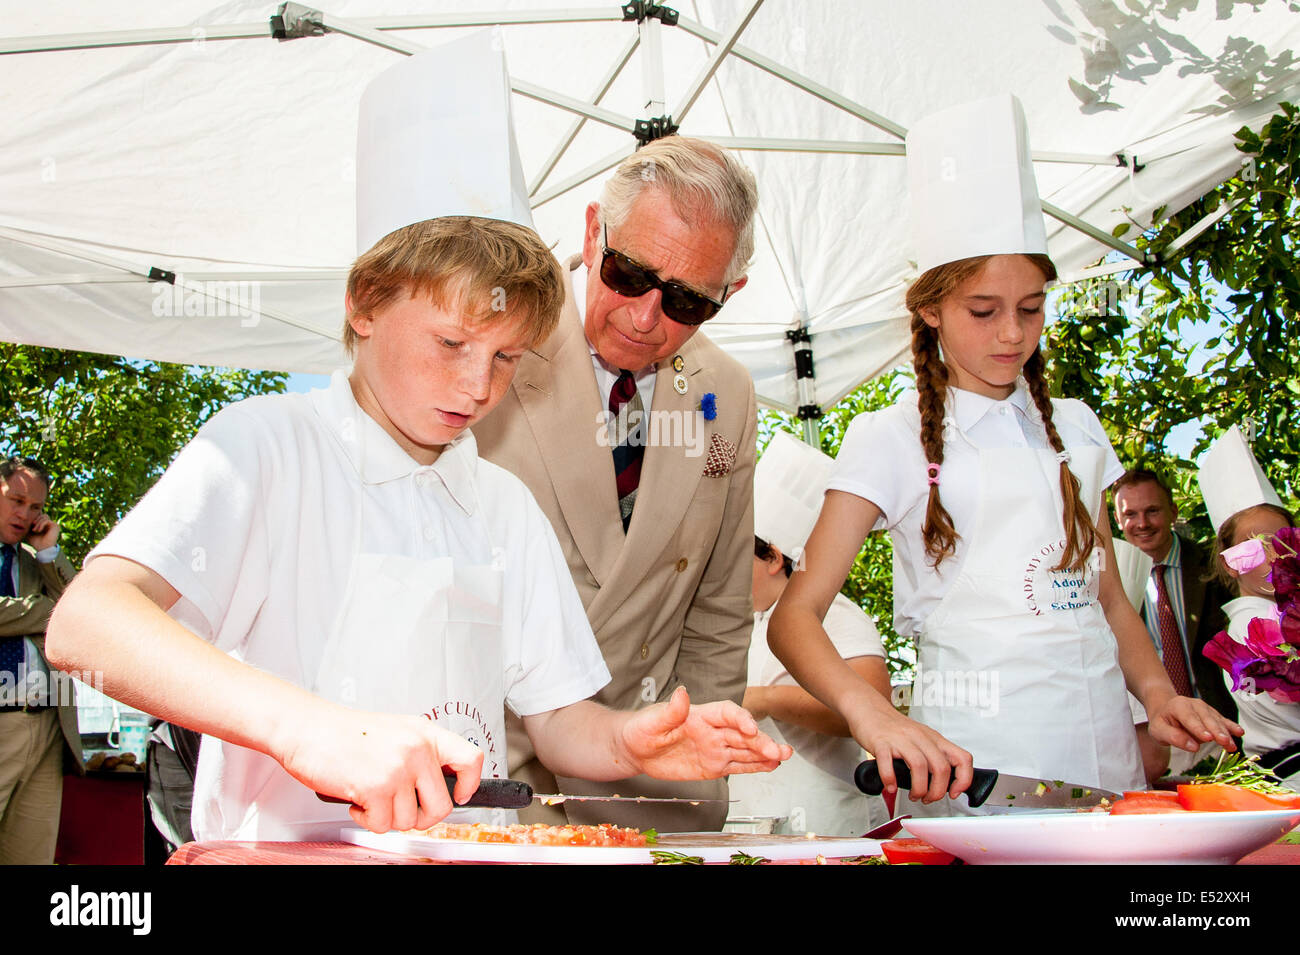 Wiston, West Sussex, UK. 18th July, 2014. HRH Prince Charles chats with children at Wiston House as they prepare lamb burgers under the tutelage of Peter Vaughan [of The Bistro, Devizes,]. The children from local Steyning Primary School's year 5 are taking part in a ‘Chef on the Farm’ day organised by Countryside Classroom. The organisation helps children to connect with where their food comes from. The children work with the gardener to source fresh produce, meet the farmers who rear the sheep, and cook with an expert chef Credit:  Julia Claxton/Alamy Live News Stock Photo